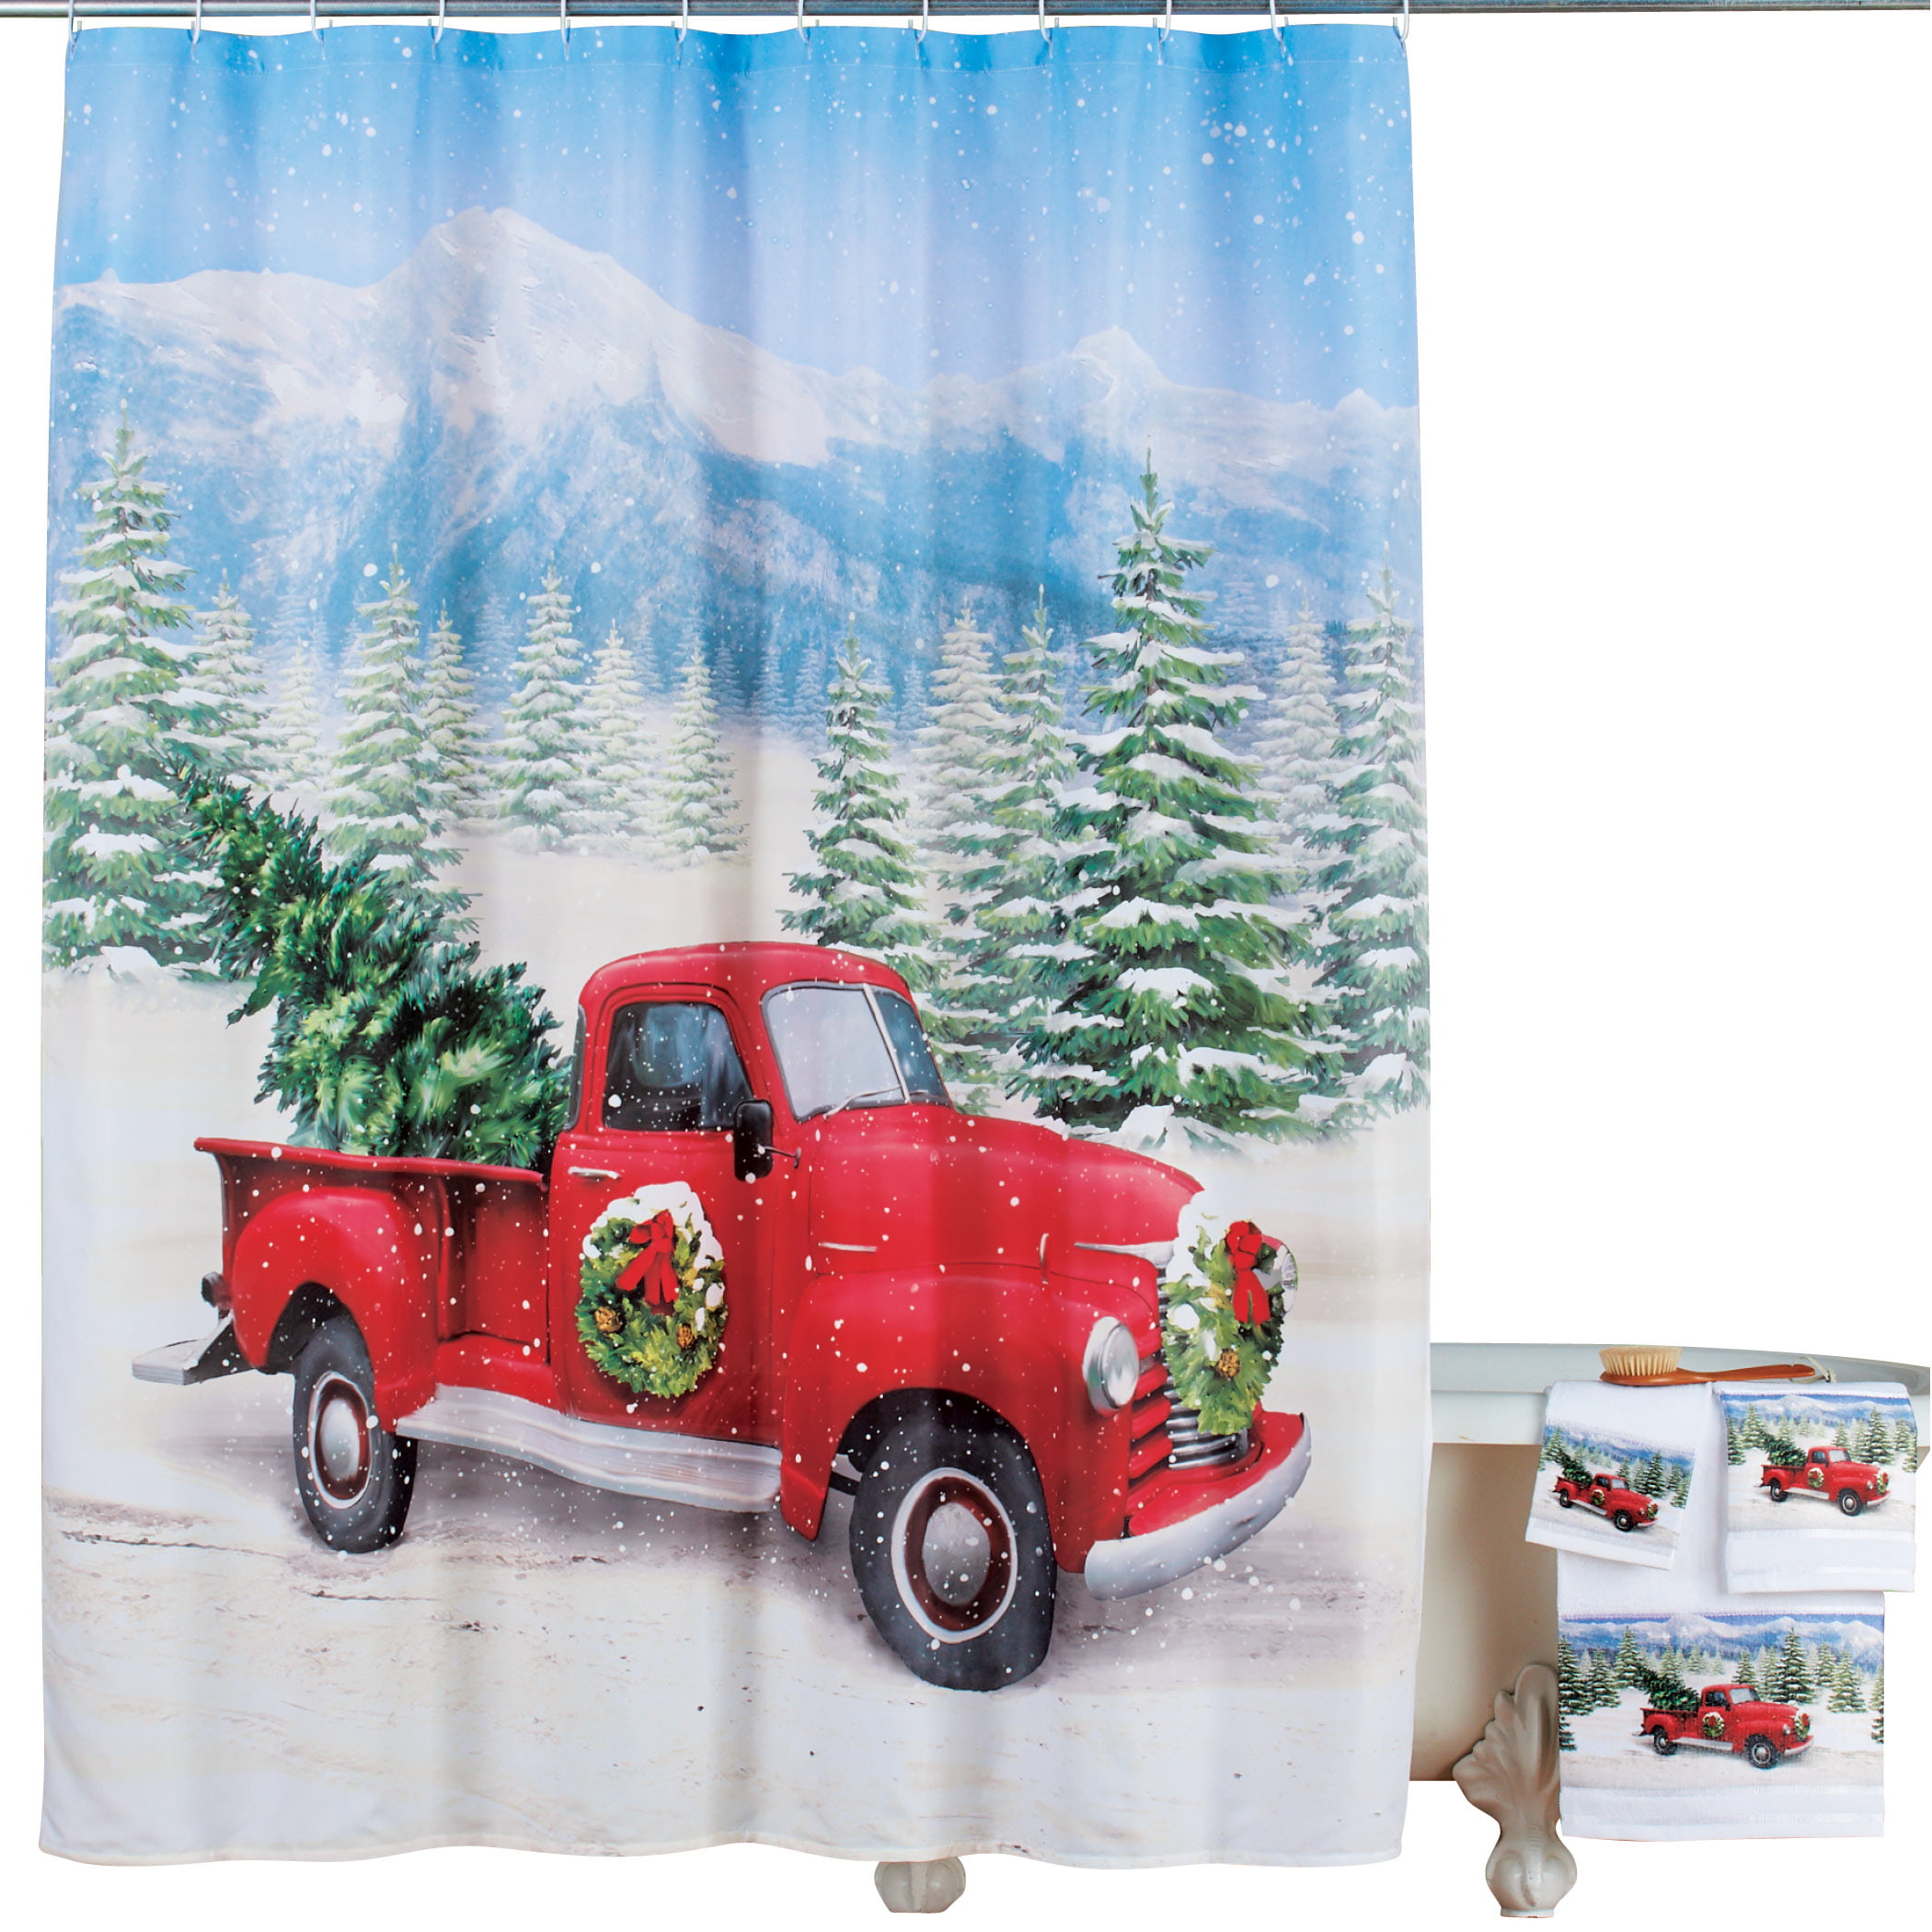 Rustic Wooden Wall Red Truck Christmas Tree Shower Curtain Set Bathroom Decor 